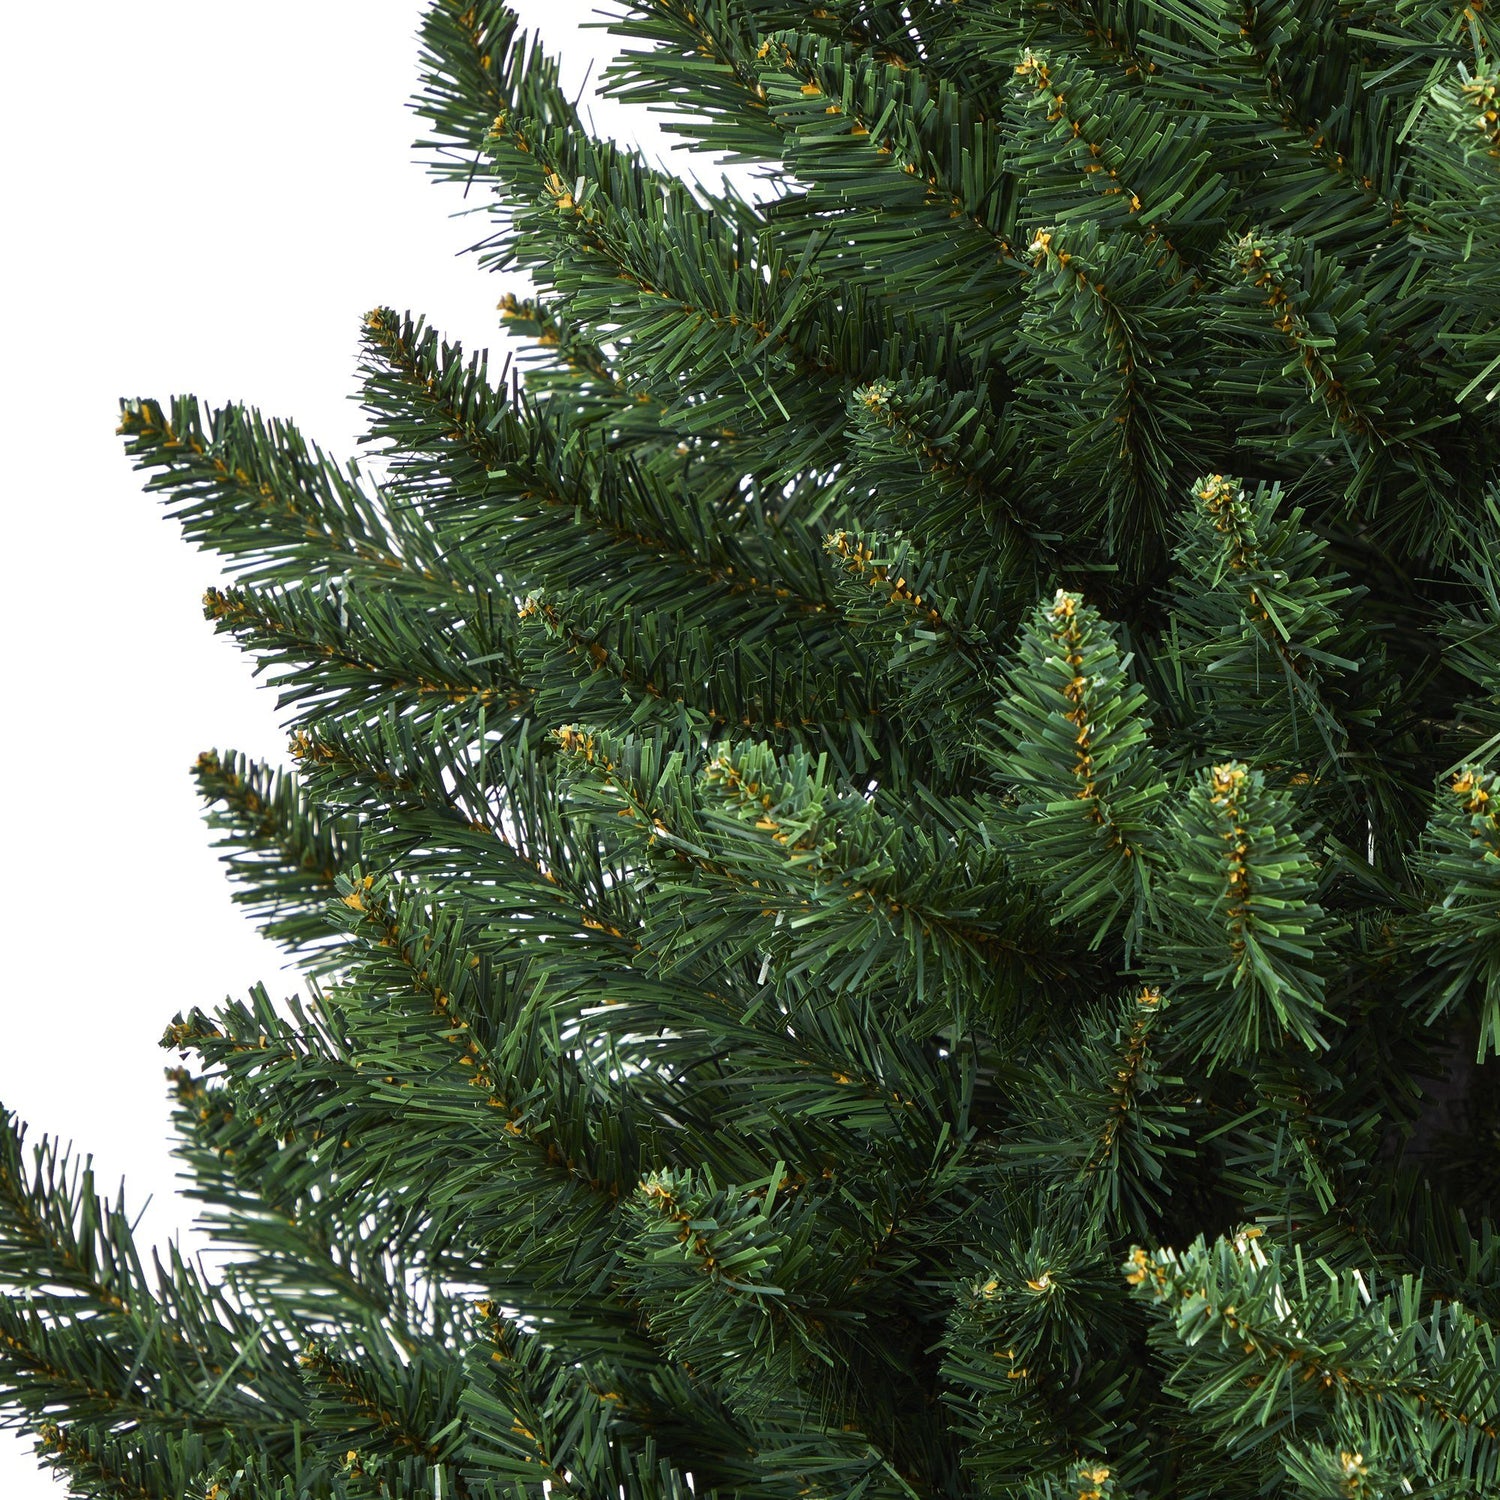 6’ Northern Rocky Spruce Artificial Christmas Tree with 838 Bendable Branches